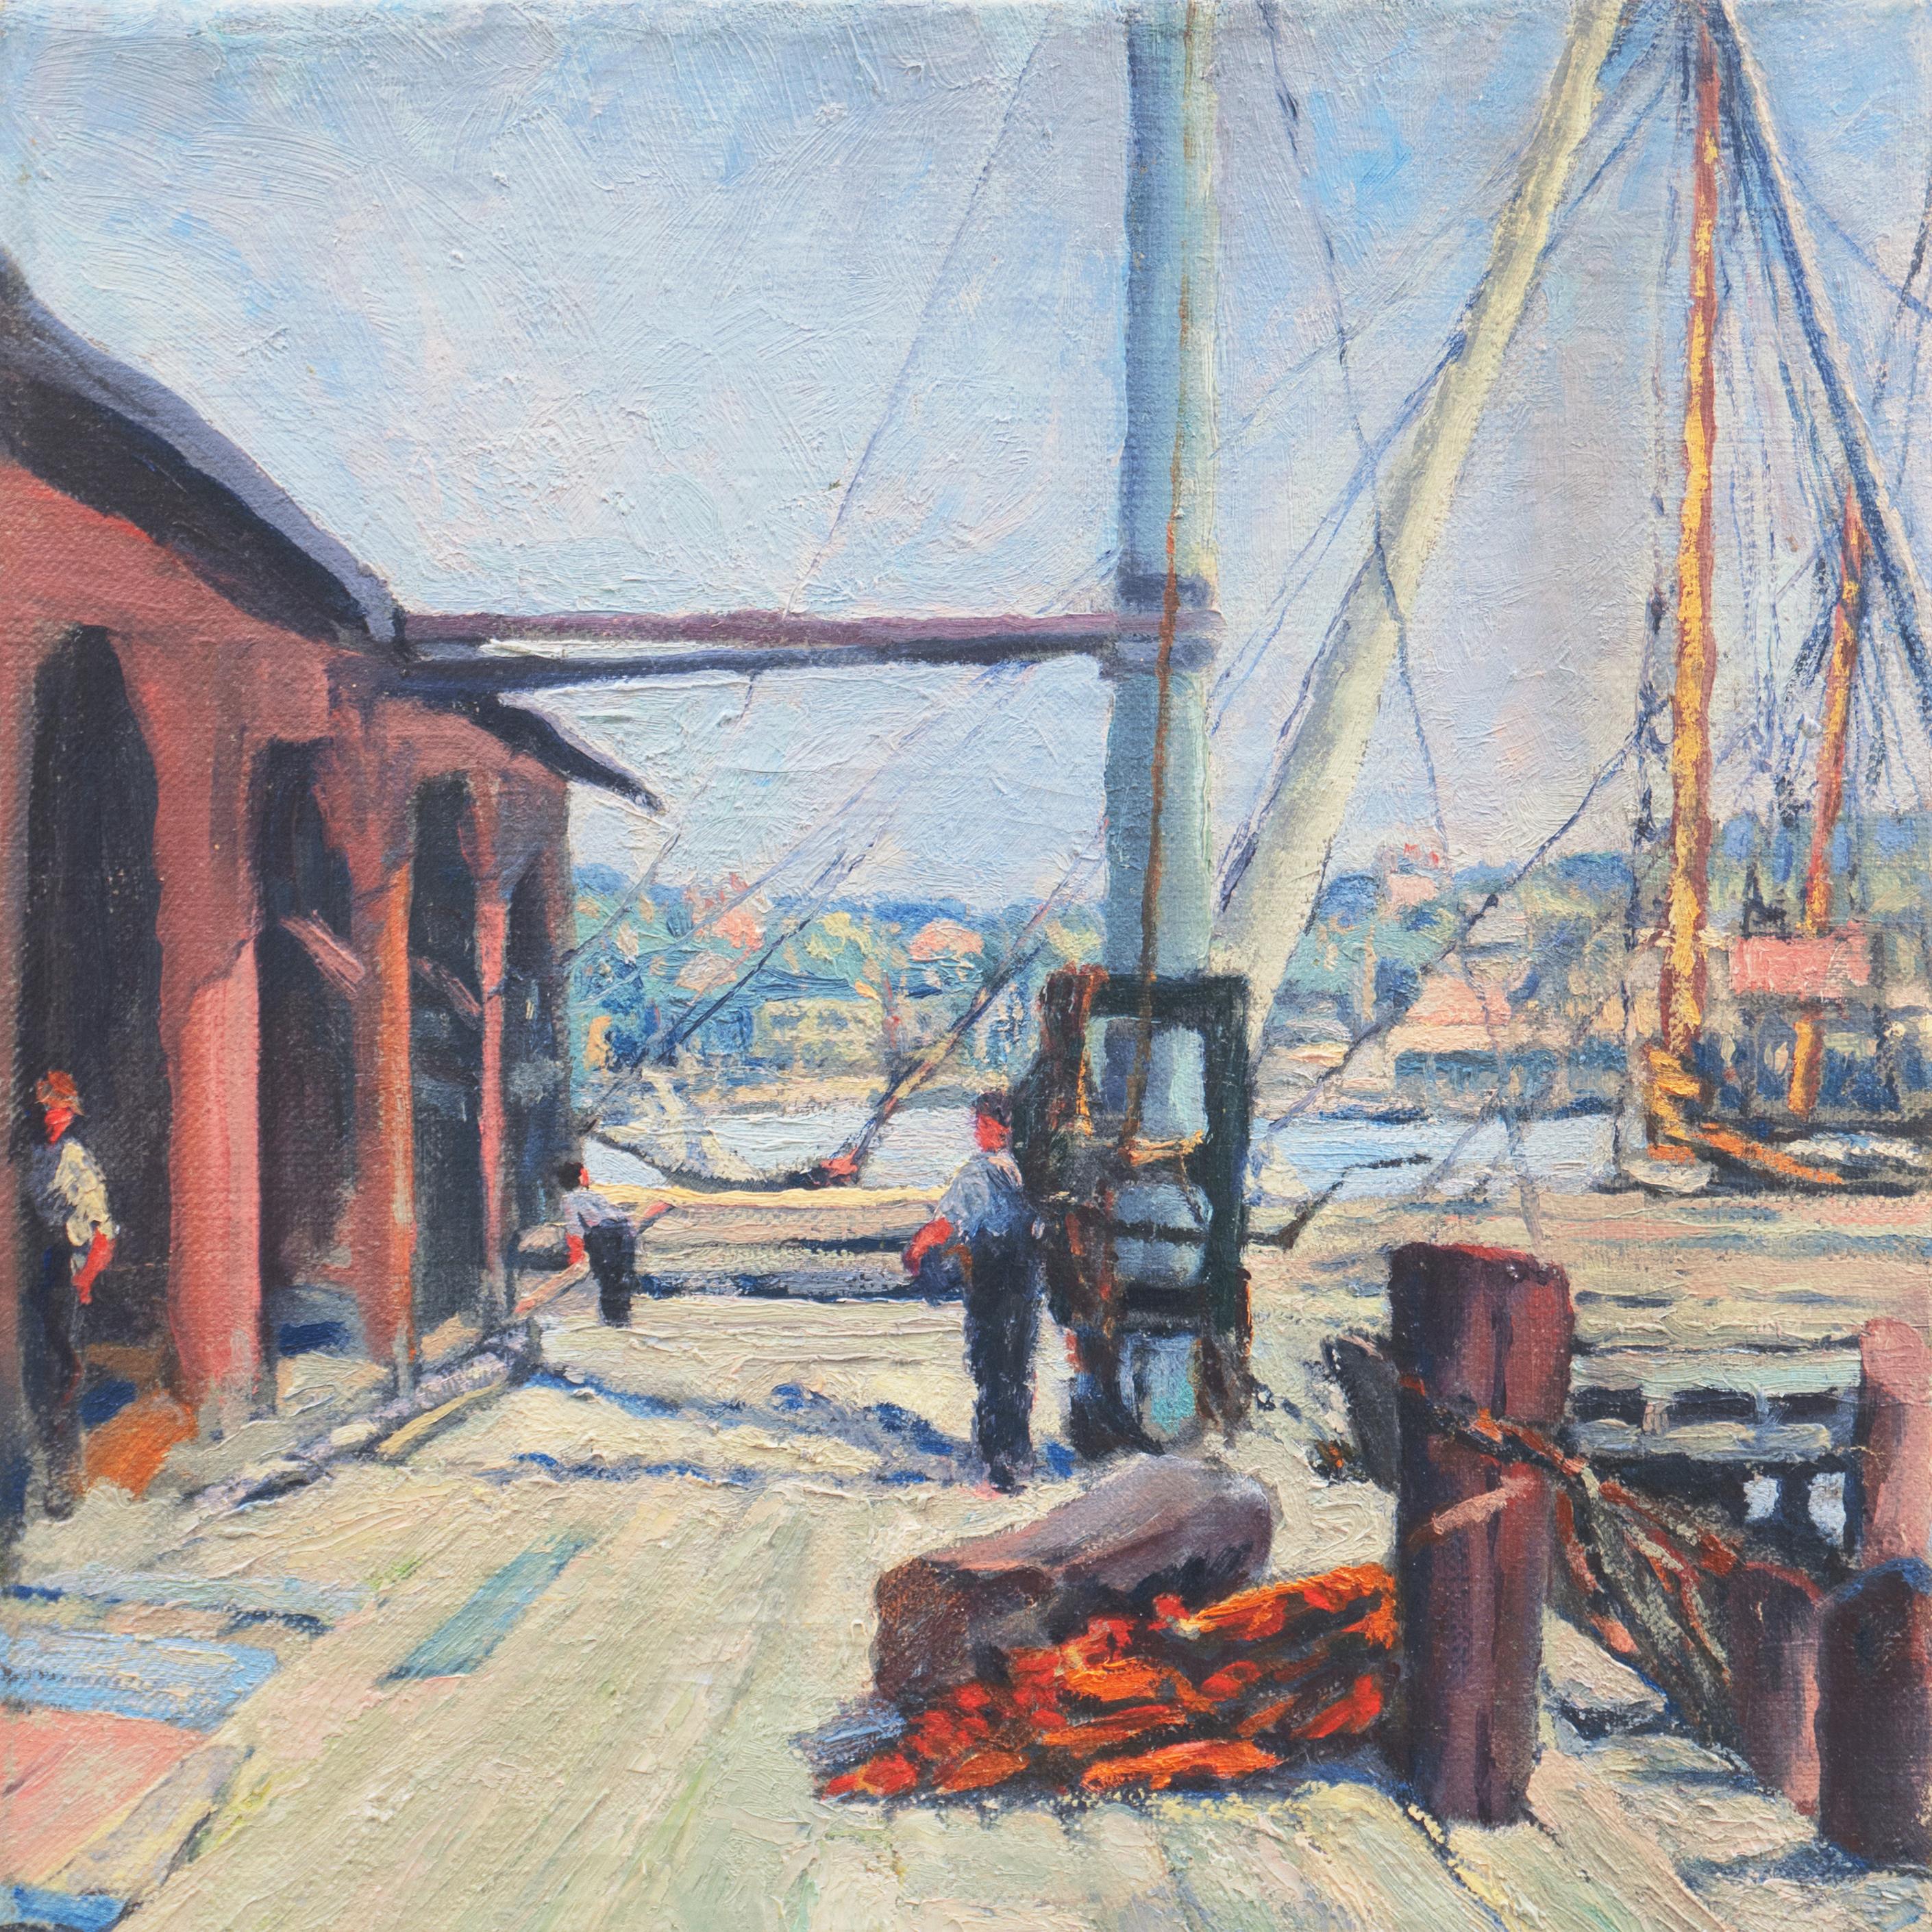 'Wharf with Dock Workers', American School, Oakland, San Francisco Bay Area Oil - Gray Landscape Painting by American School (20th century)